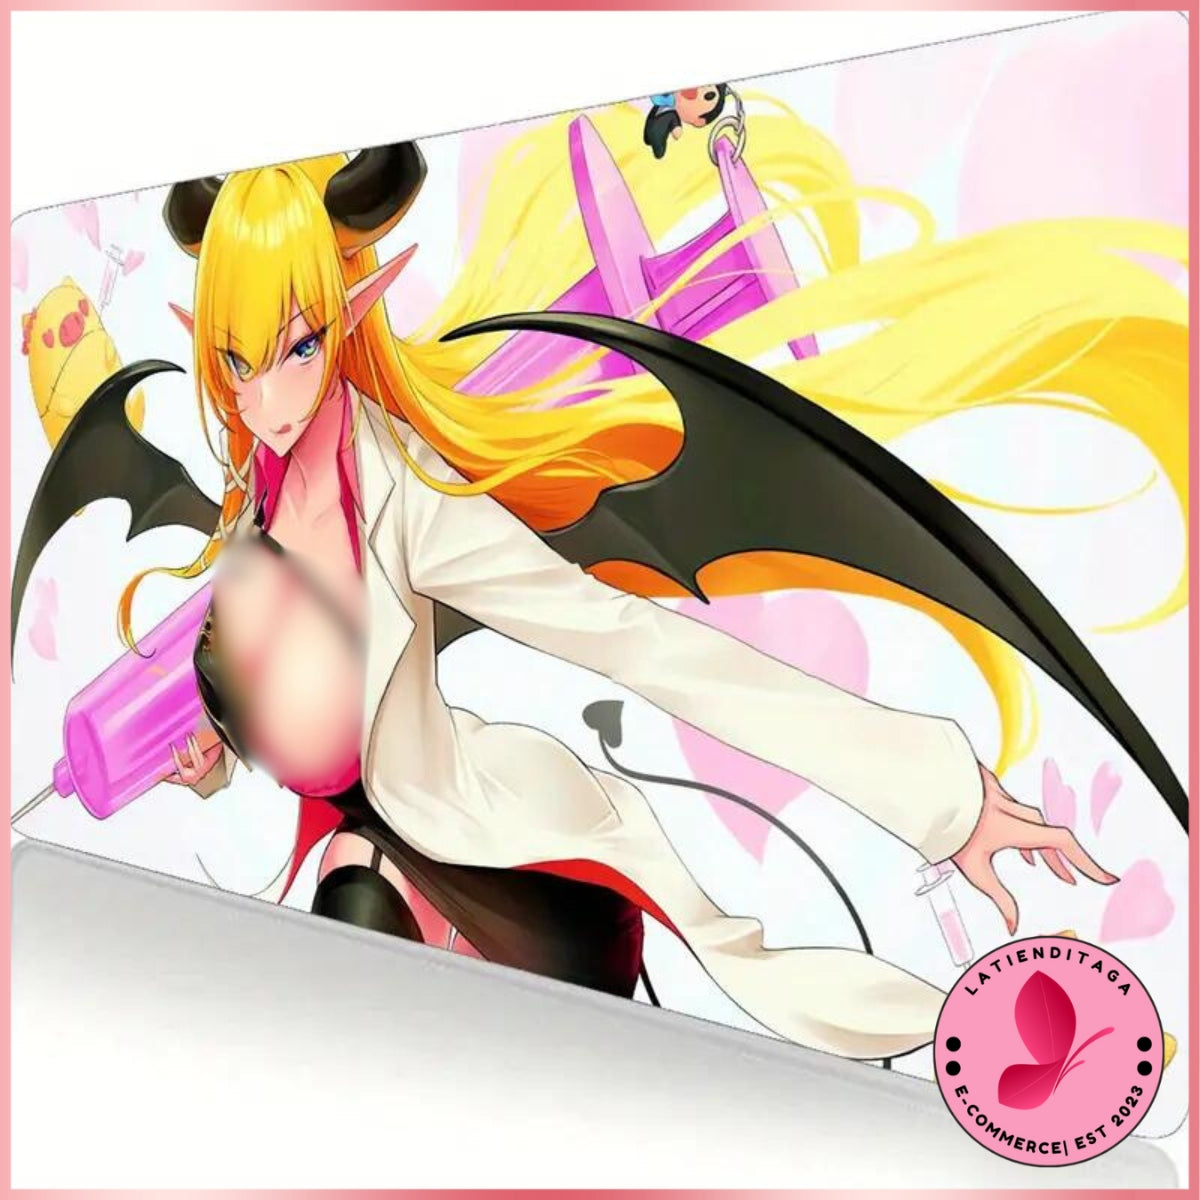 Bring Anime to Life with this 3D Digital Printed Girl Mouse Pad